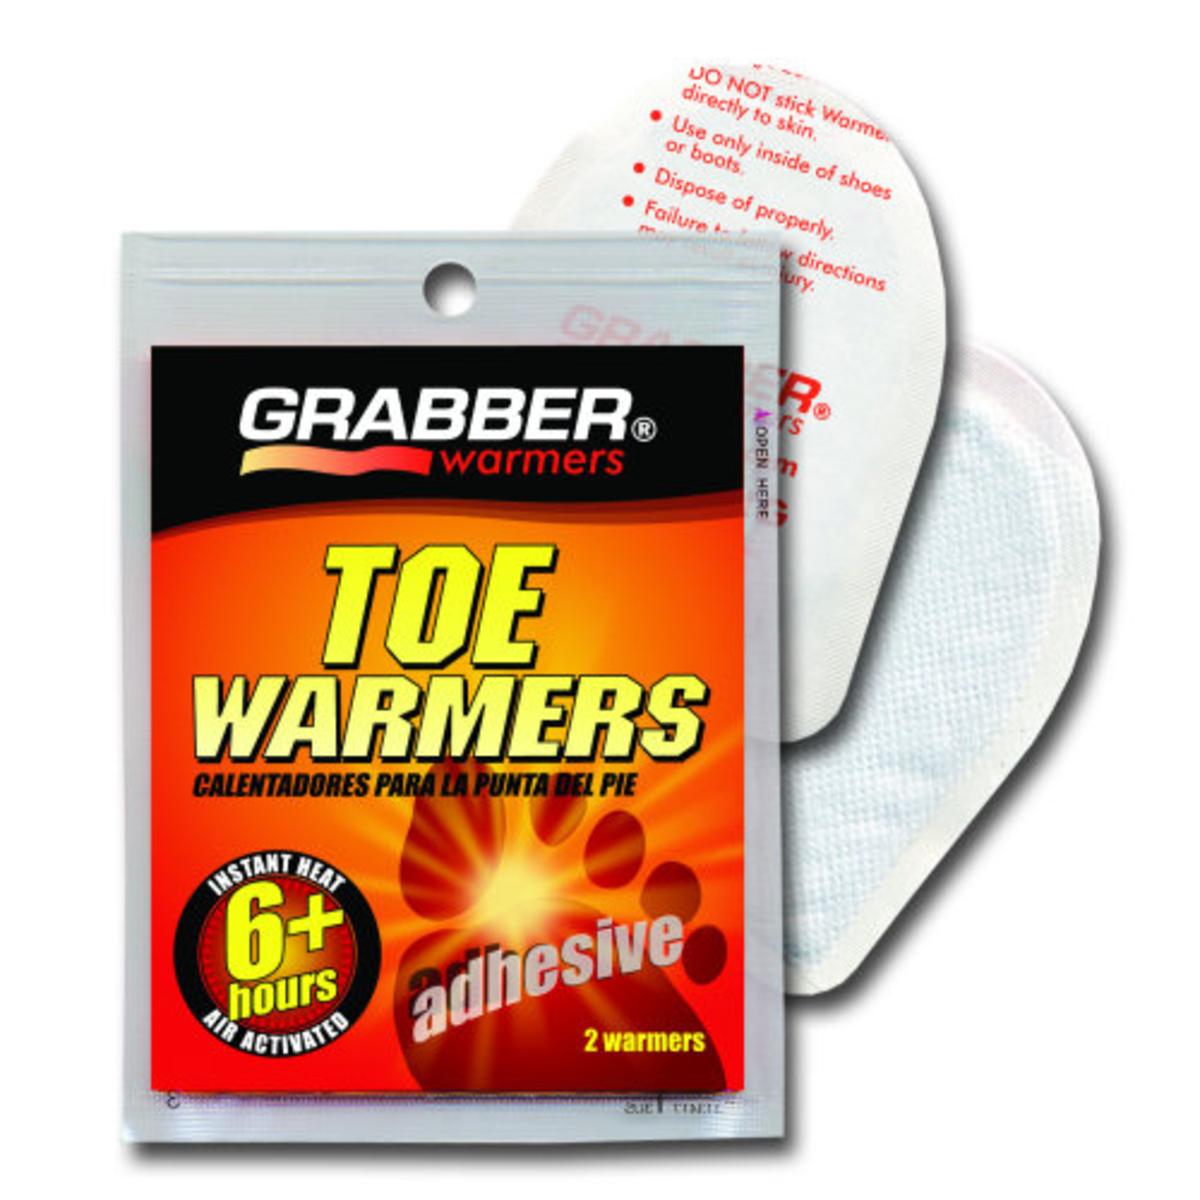 grabber hand warmers instructions